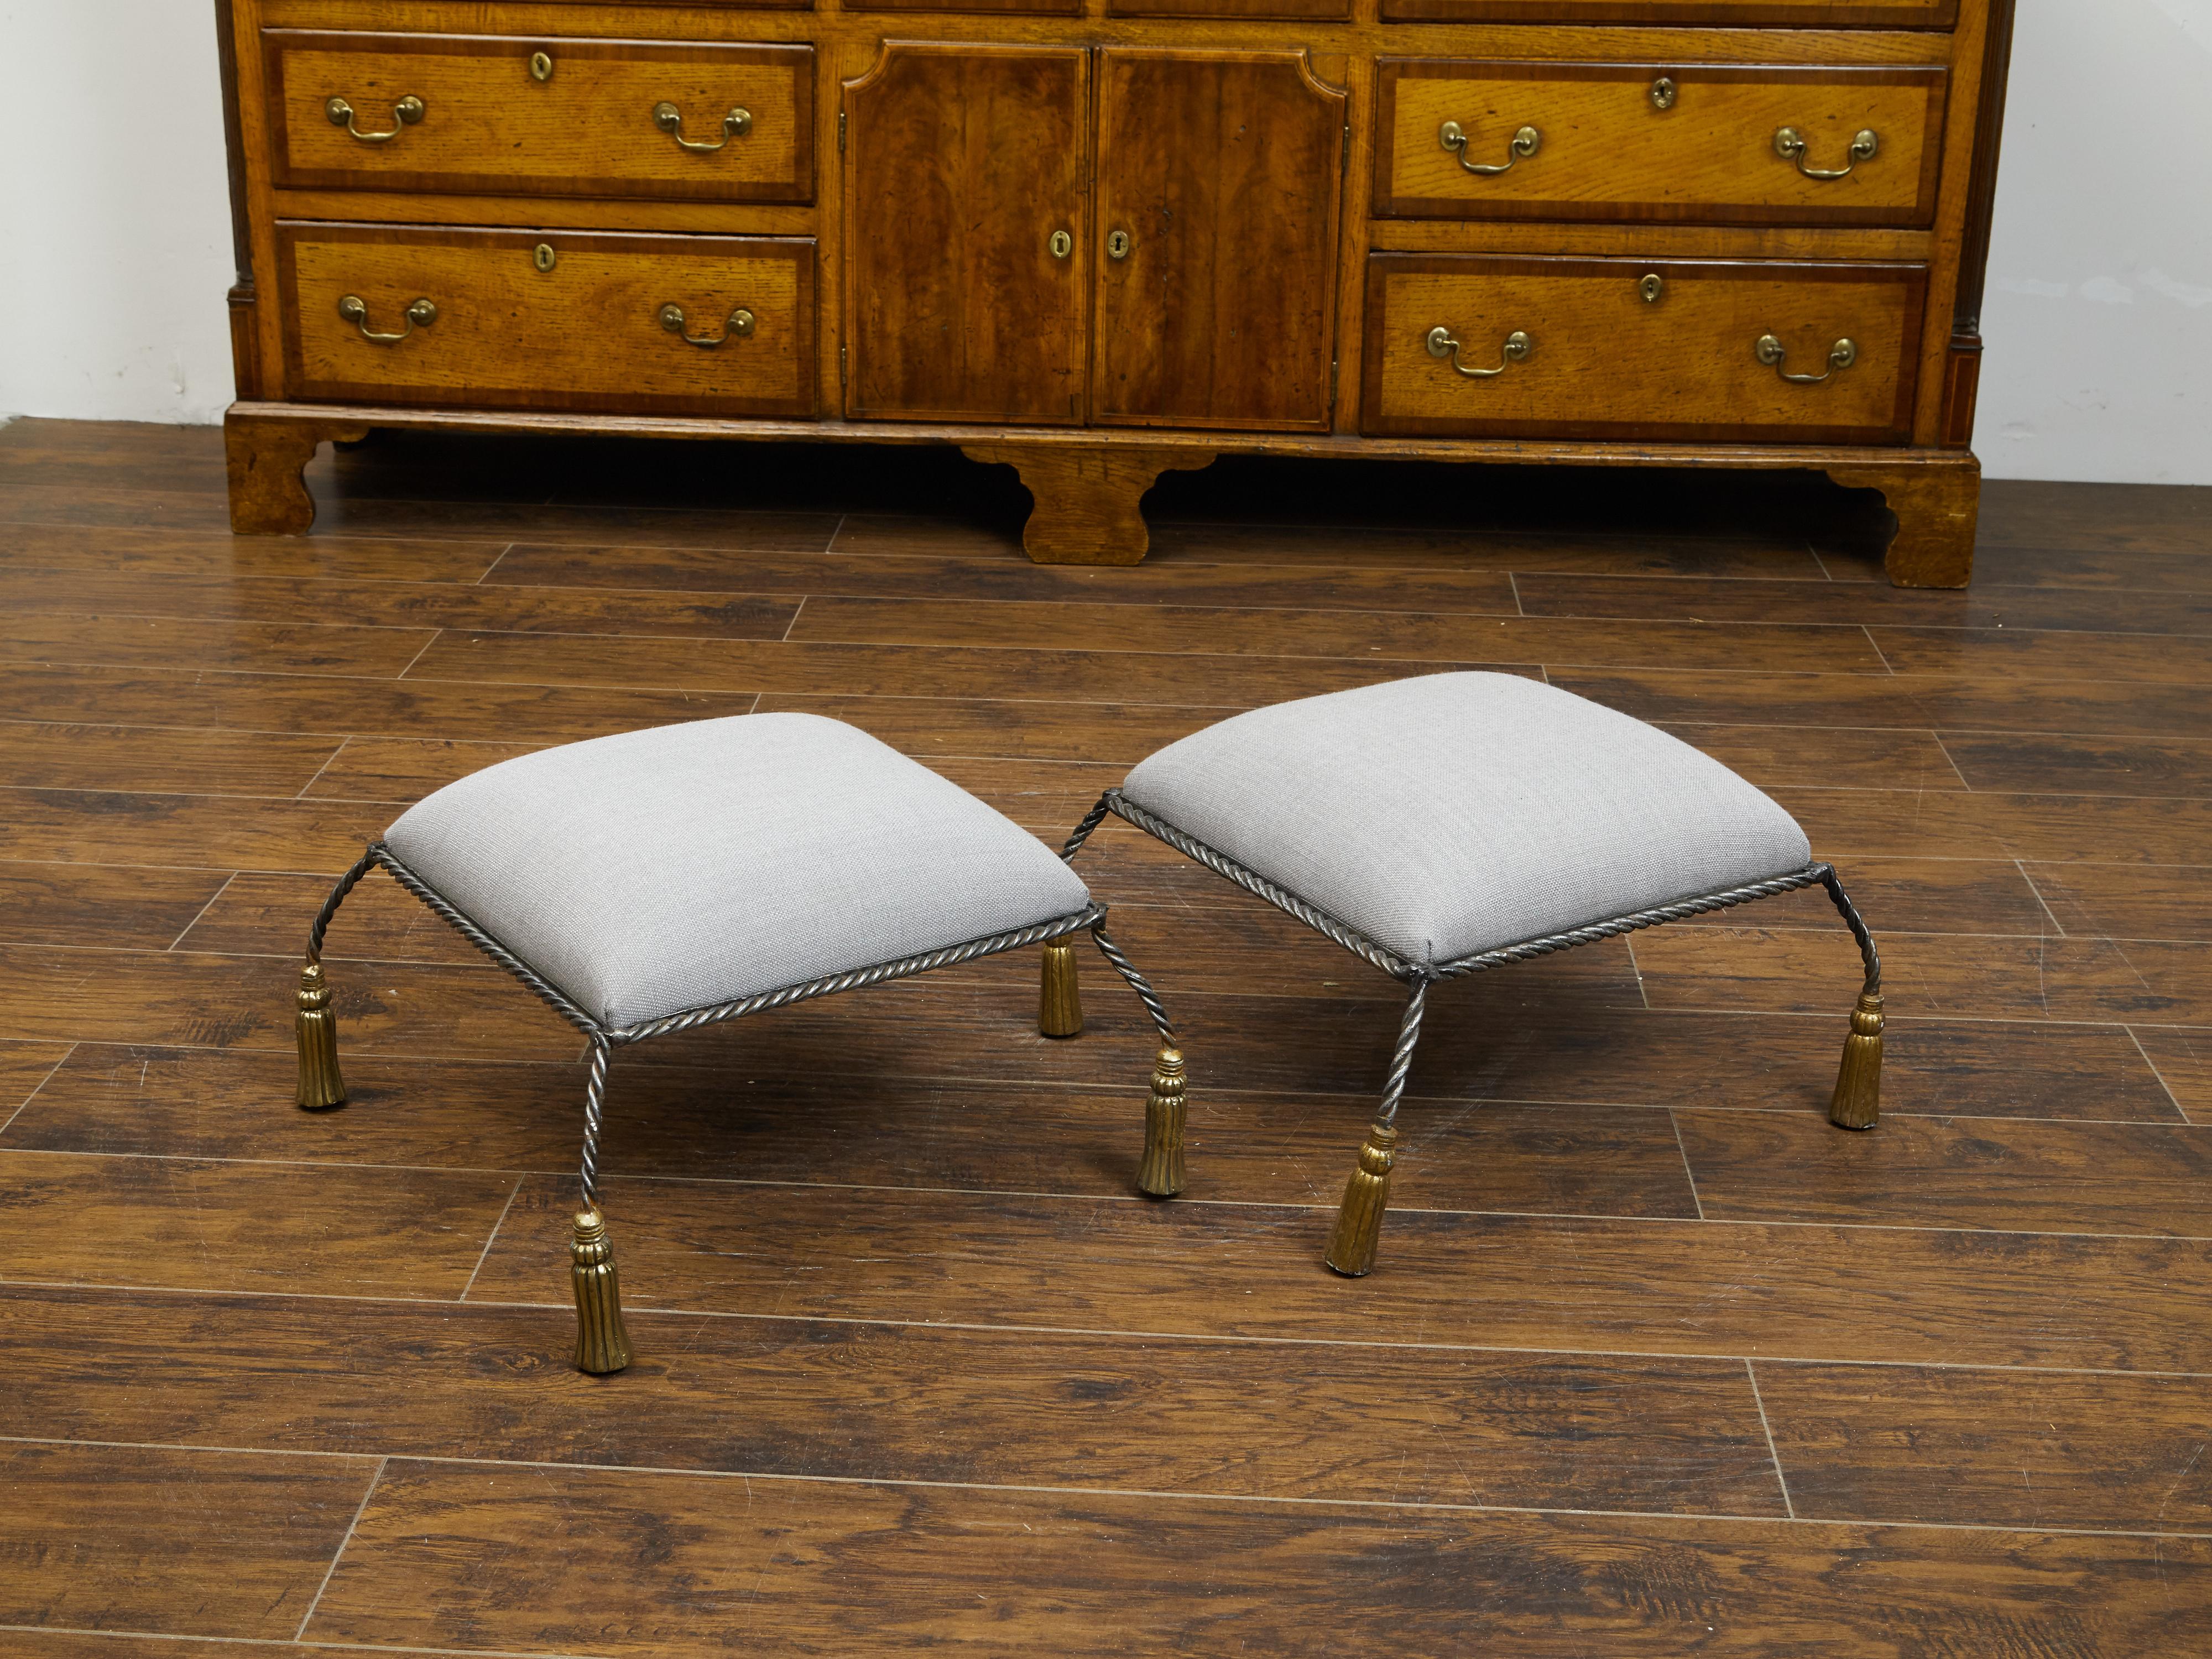 20th Century Pair of Italian Midcentury Twisted Rope Metal Stools with Carved Wooden Tassels For Sale